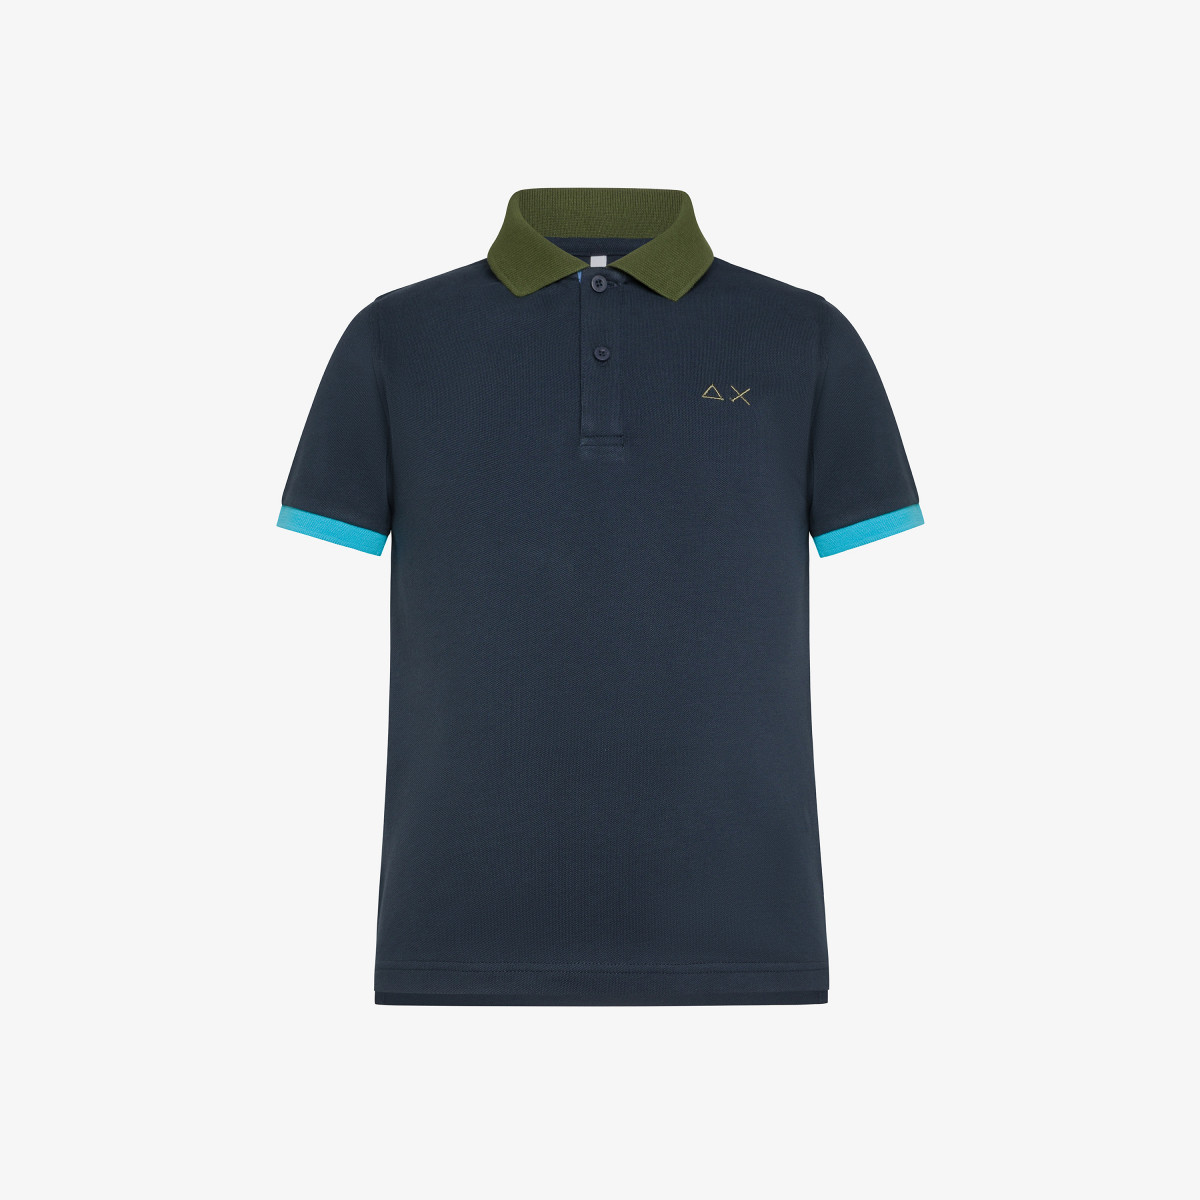 BOY'S POLO 3 COLOR WAY S/S NAVY BLUE